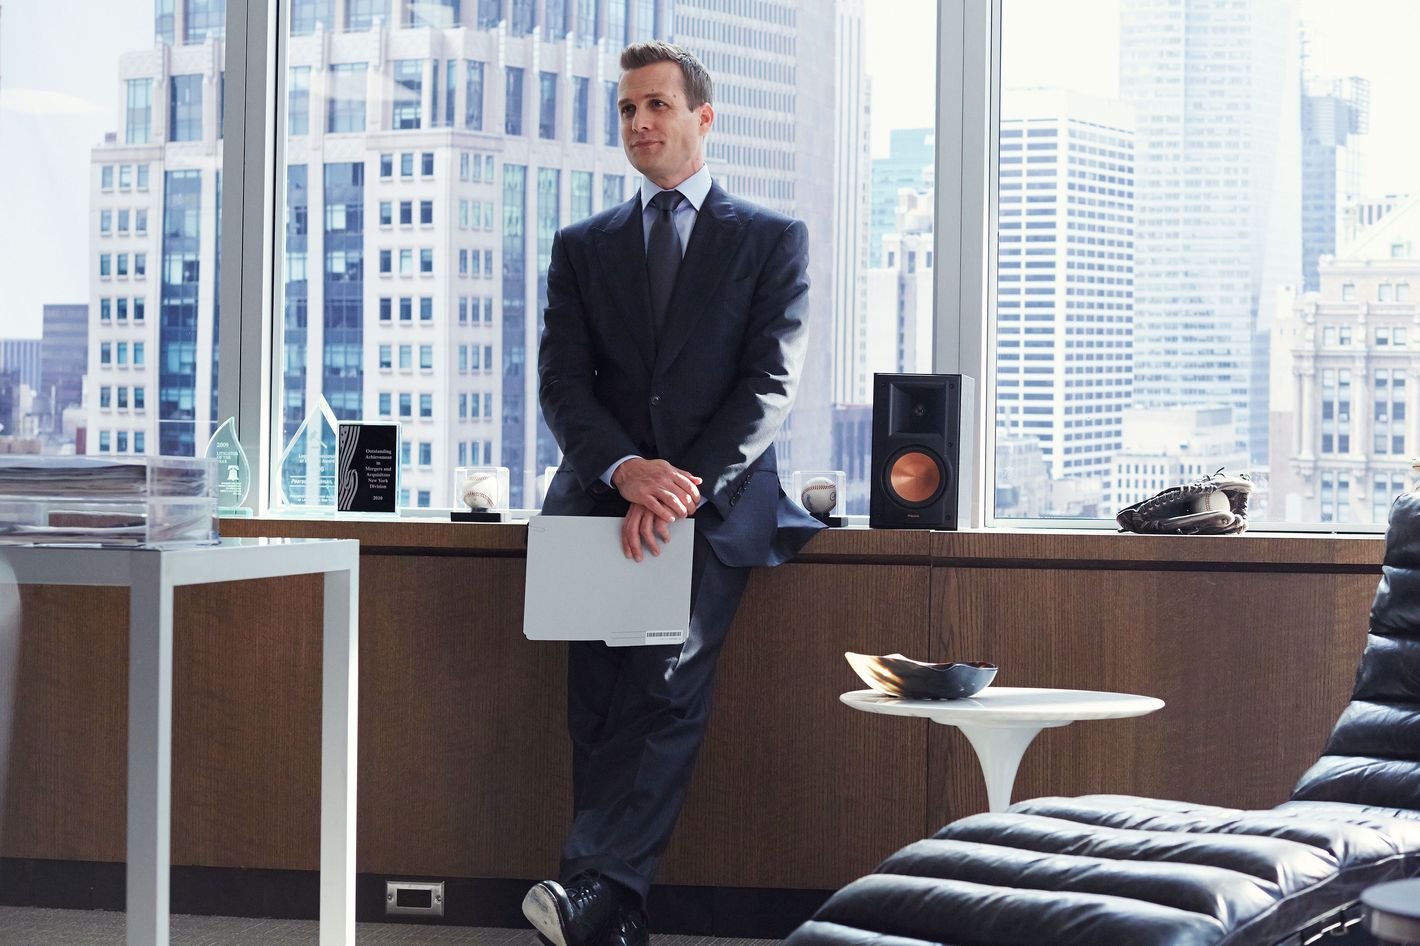 Suits' spinoff needs more narrative traction